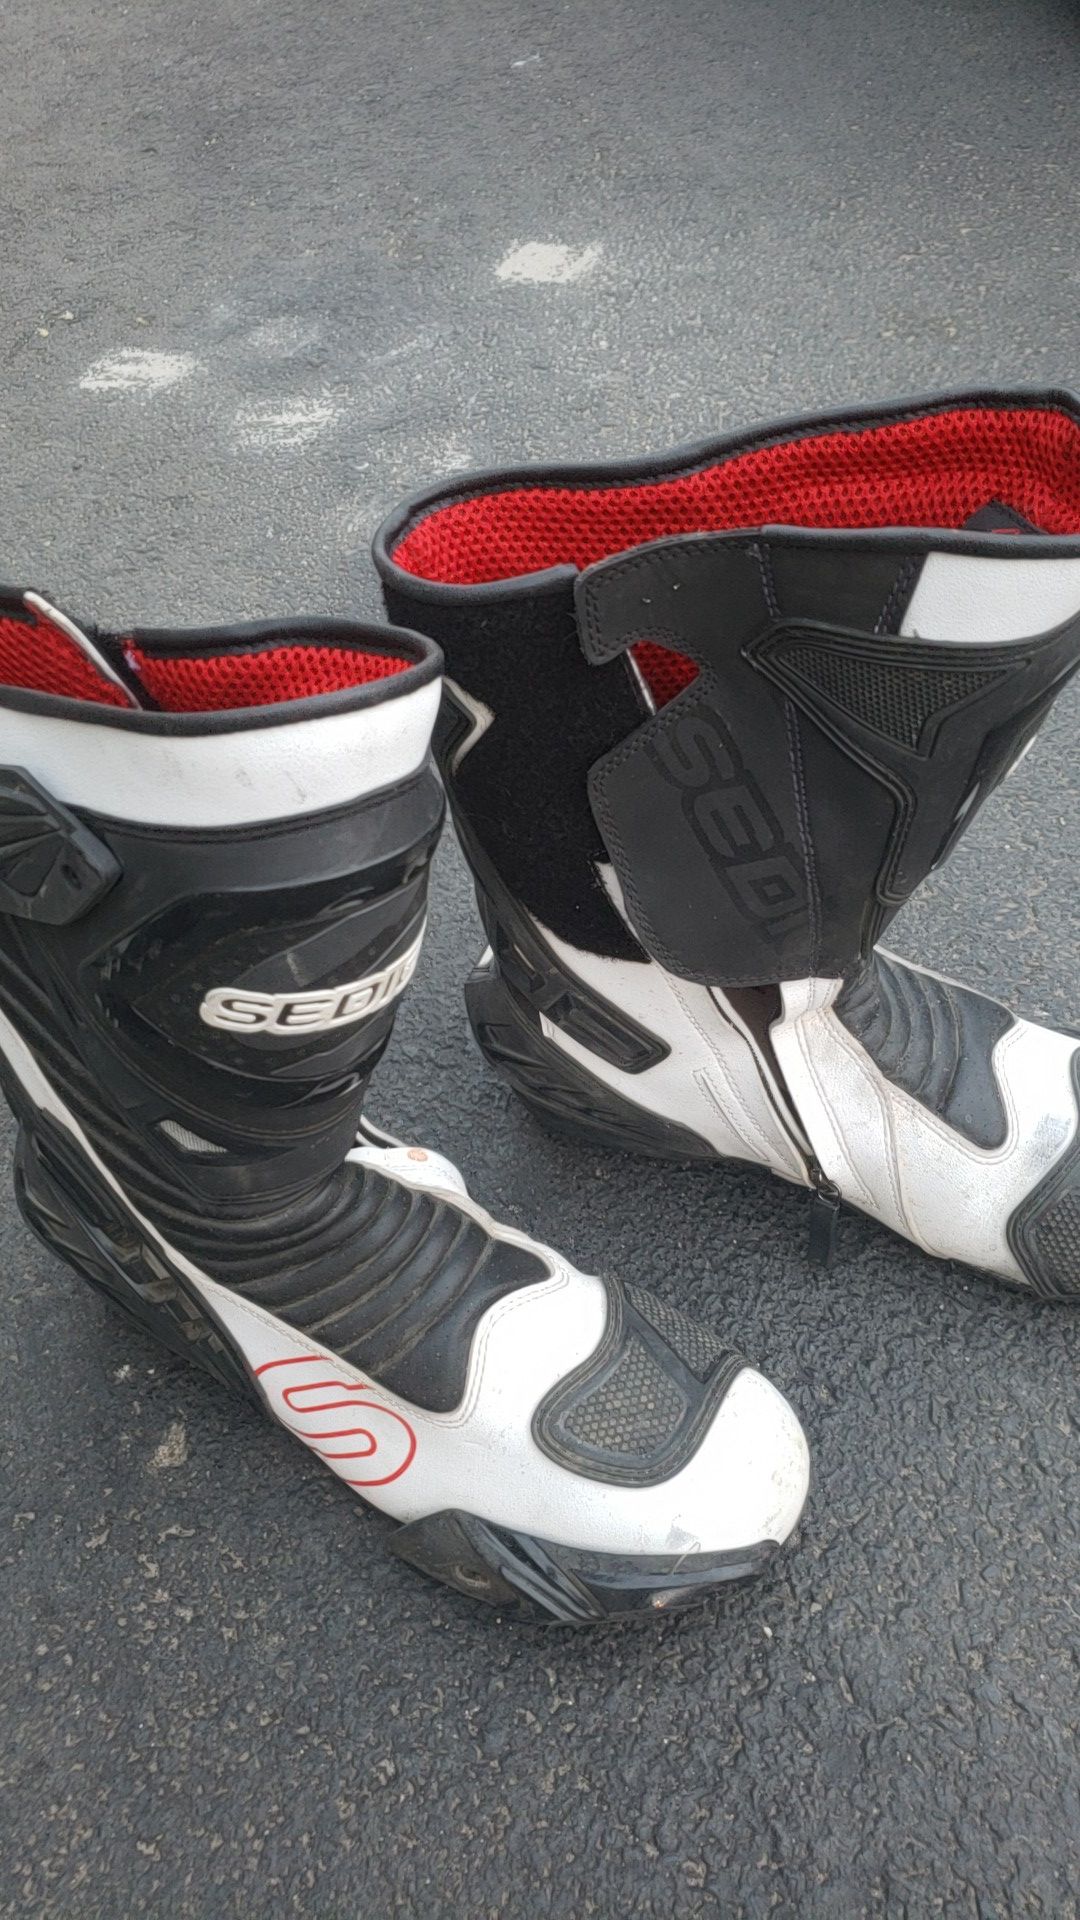 Sedici Ultimo motorcycle boots